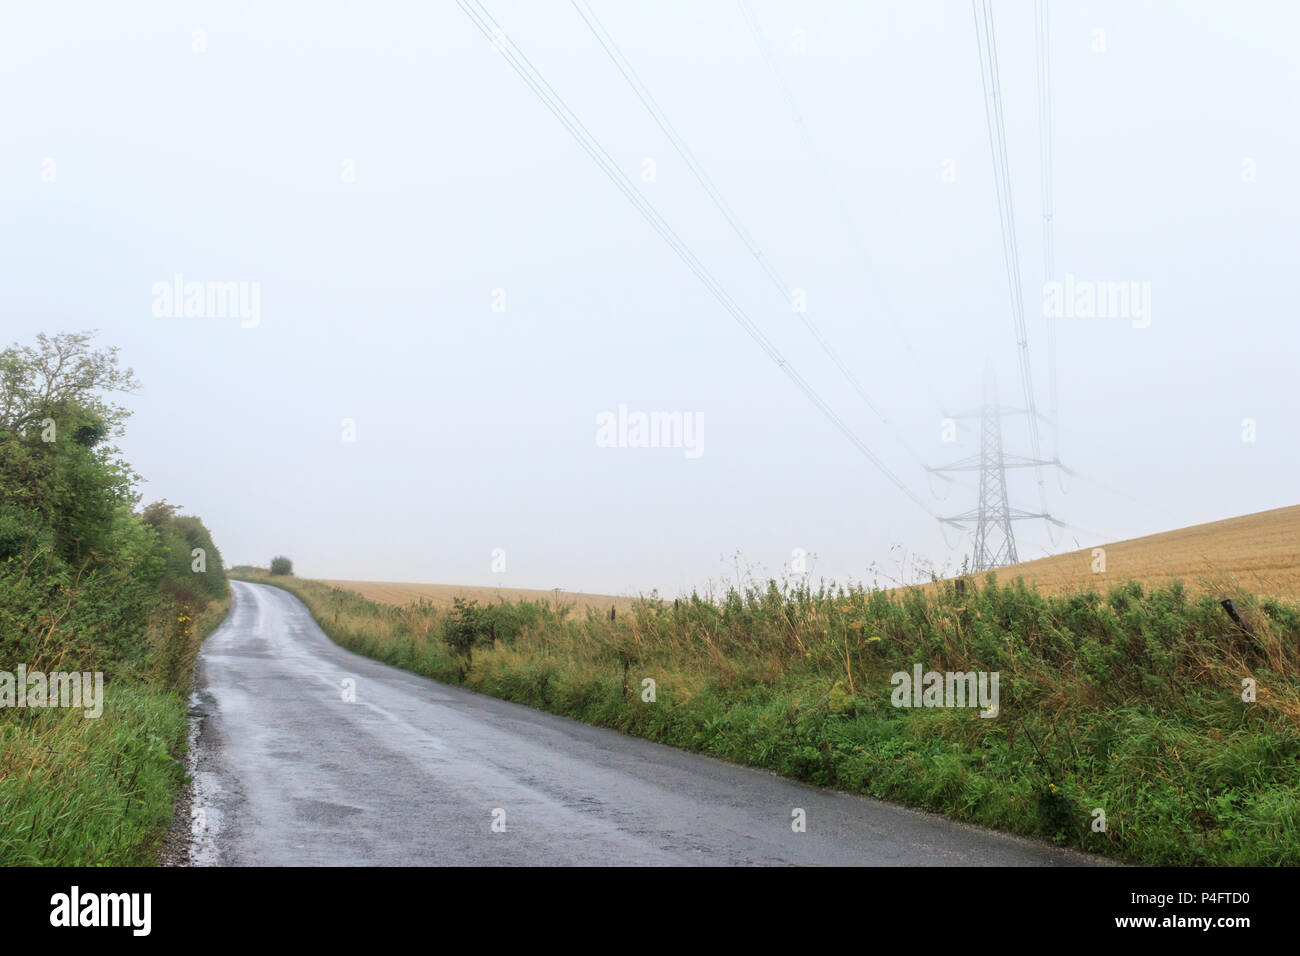 Electricity pylon looming from a wheat field by a country road in Dorset, UK, on a damp and misty day Stock Photo